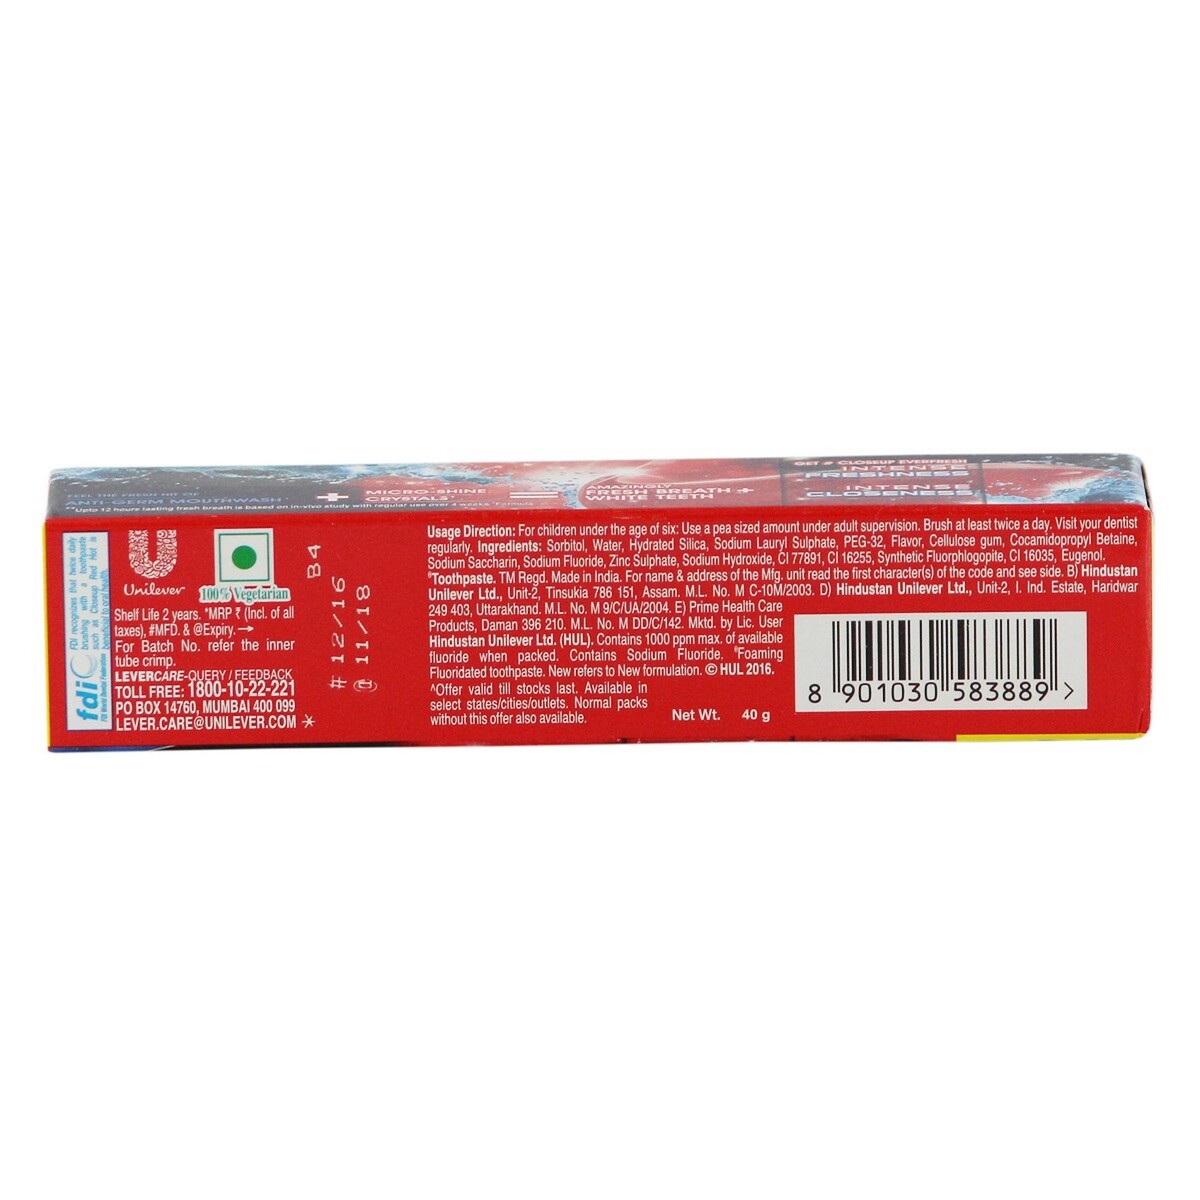 Close Up Tooth Paste Red Hot 40g